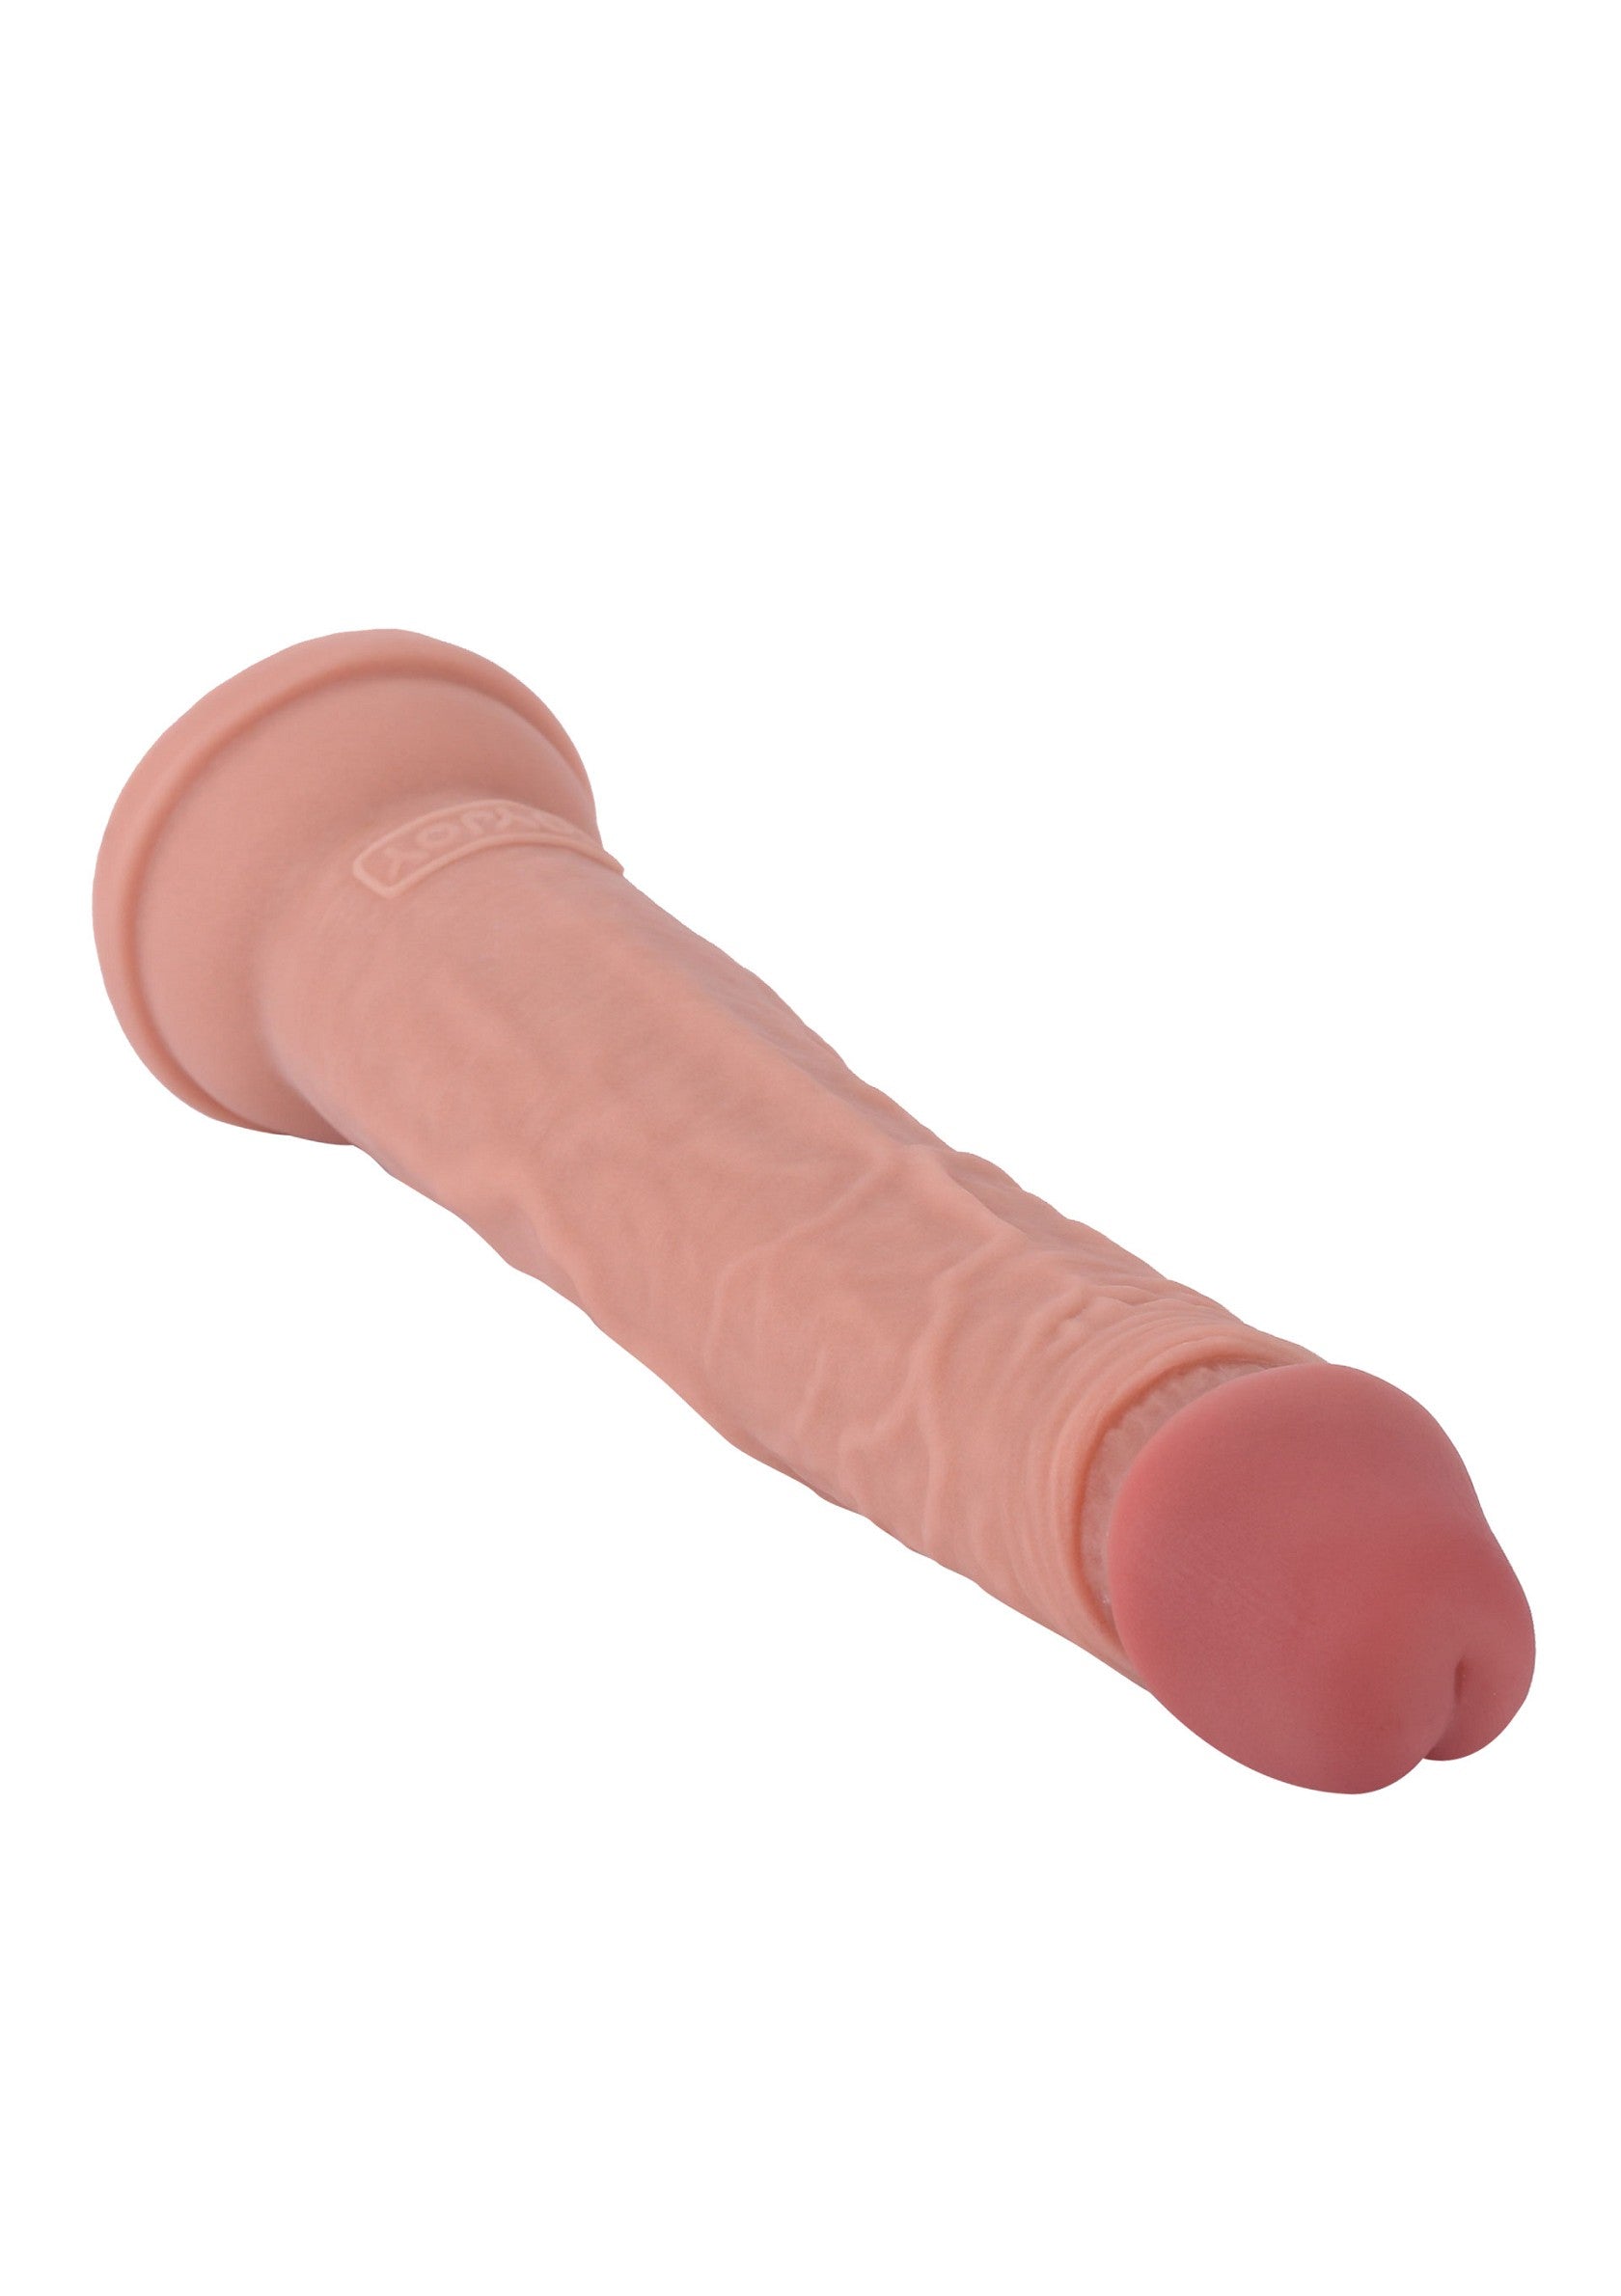 ToyJoy Get Real Deluxe Dual Density Dong 13' SKIN - 5